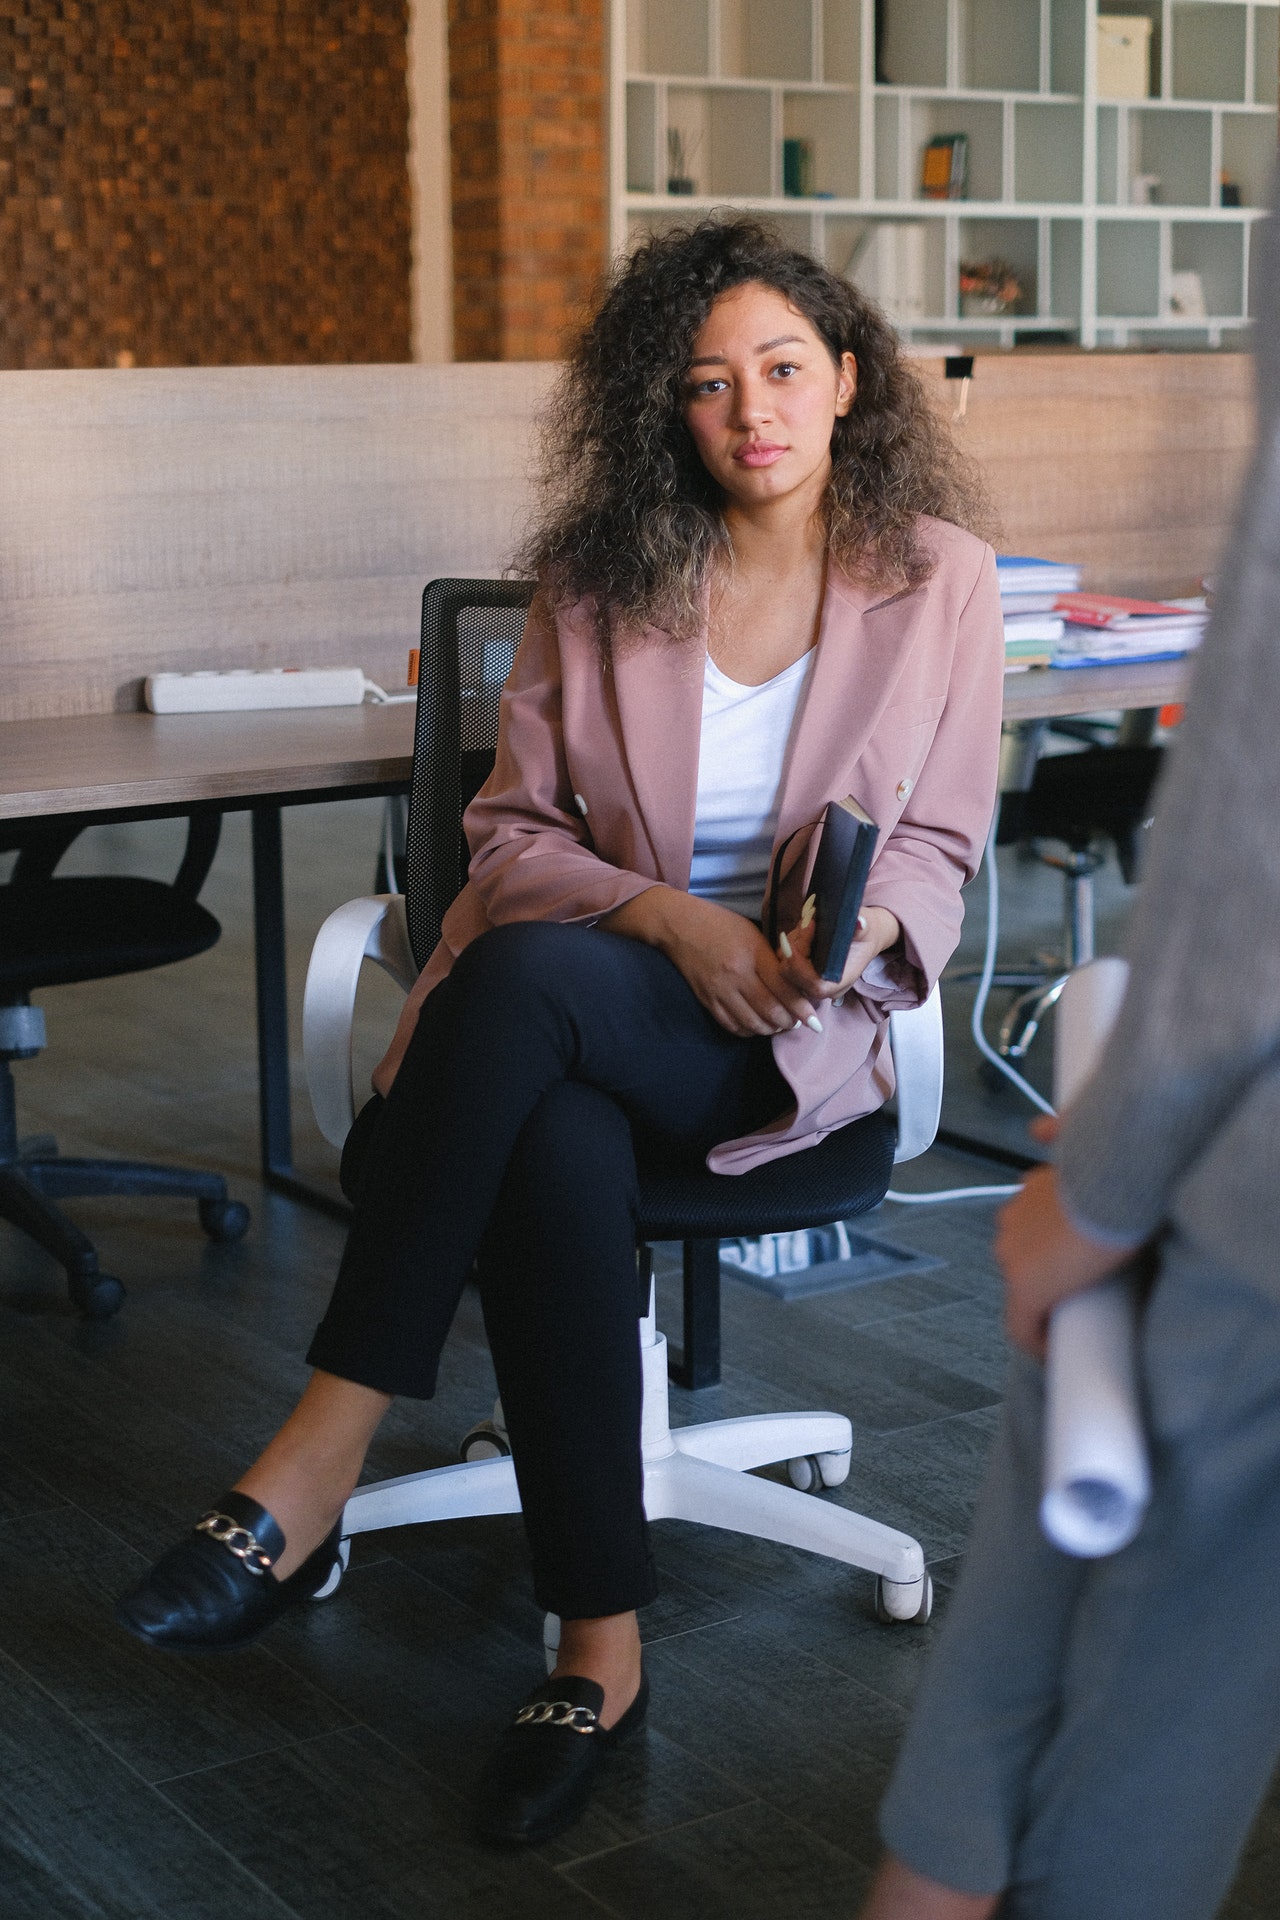 BIPOC Woman in a suit staring at the camera